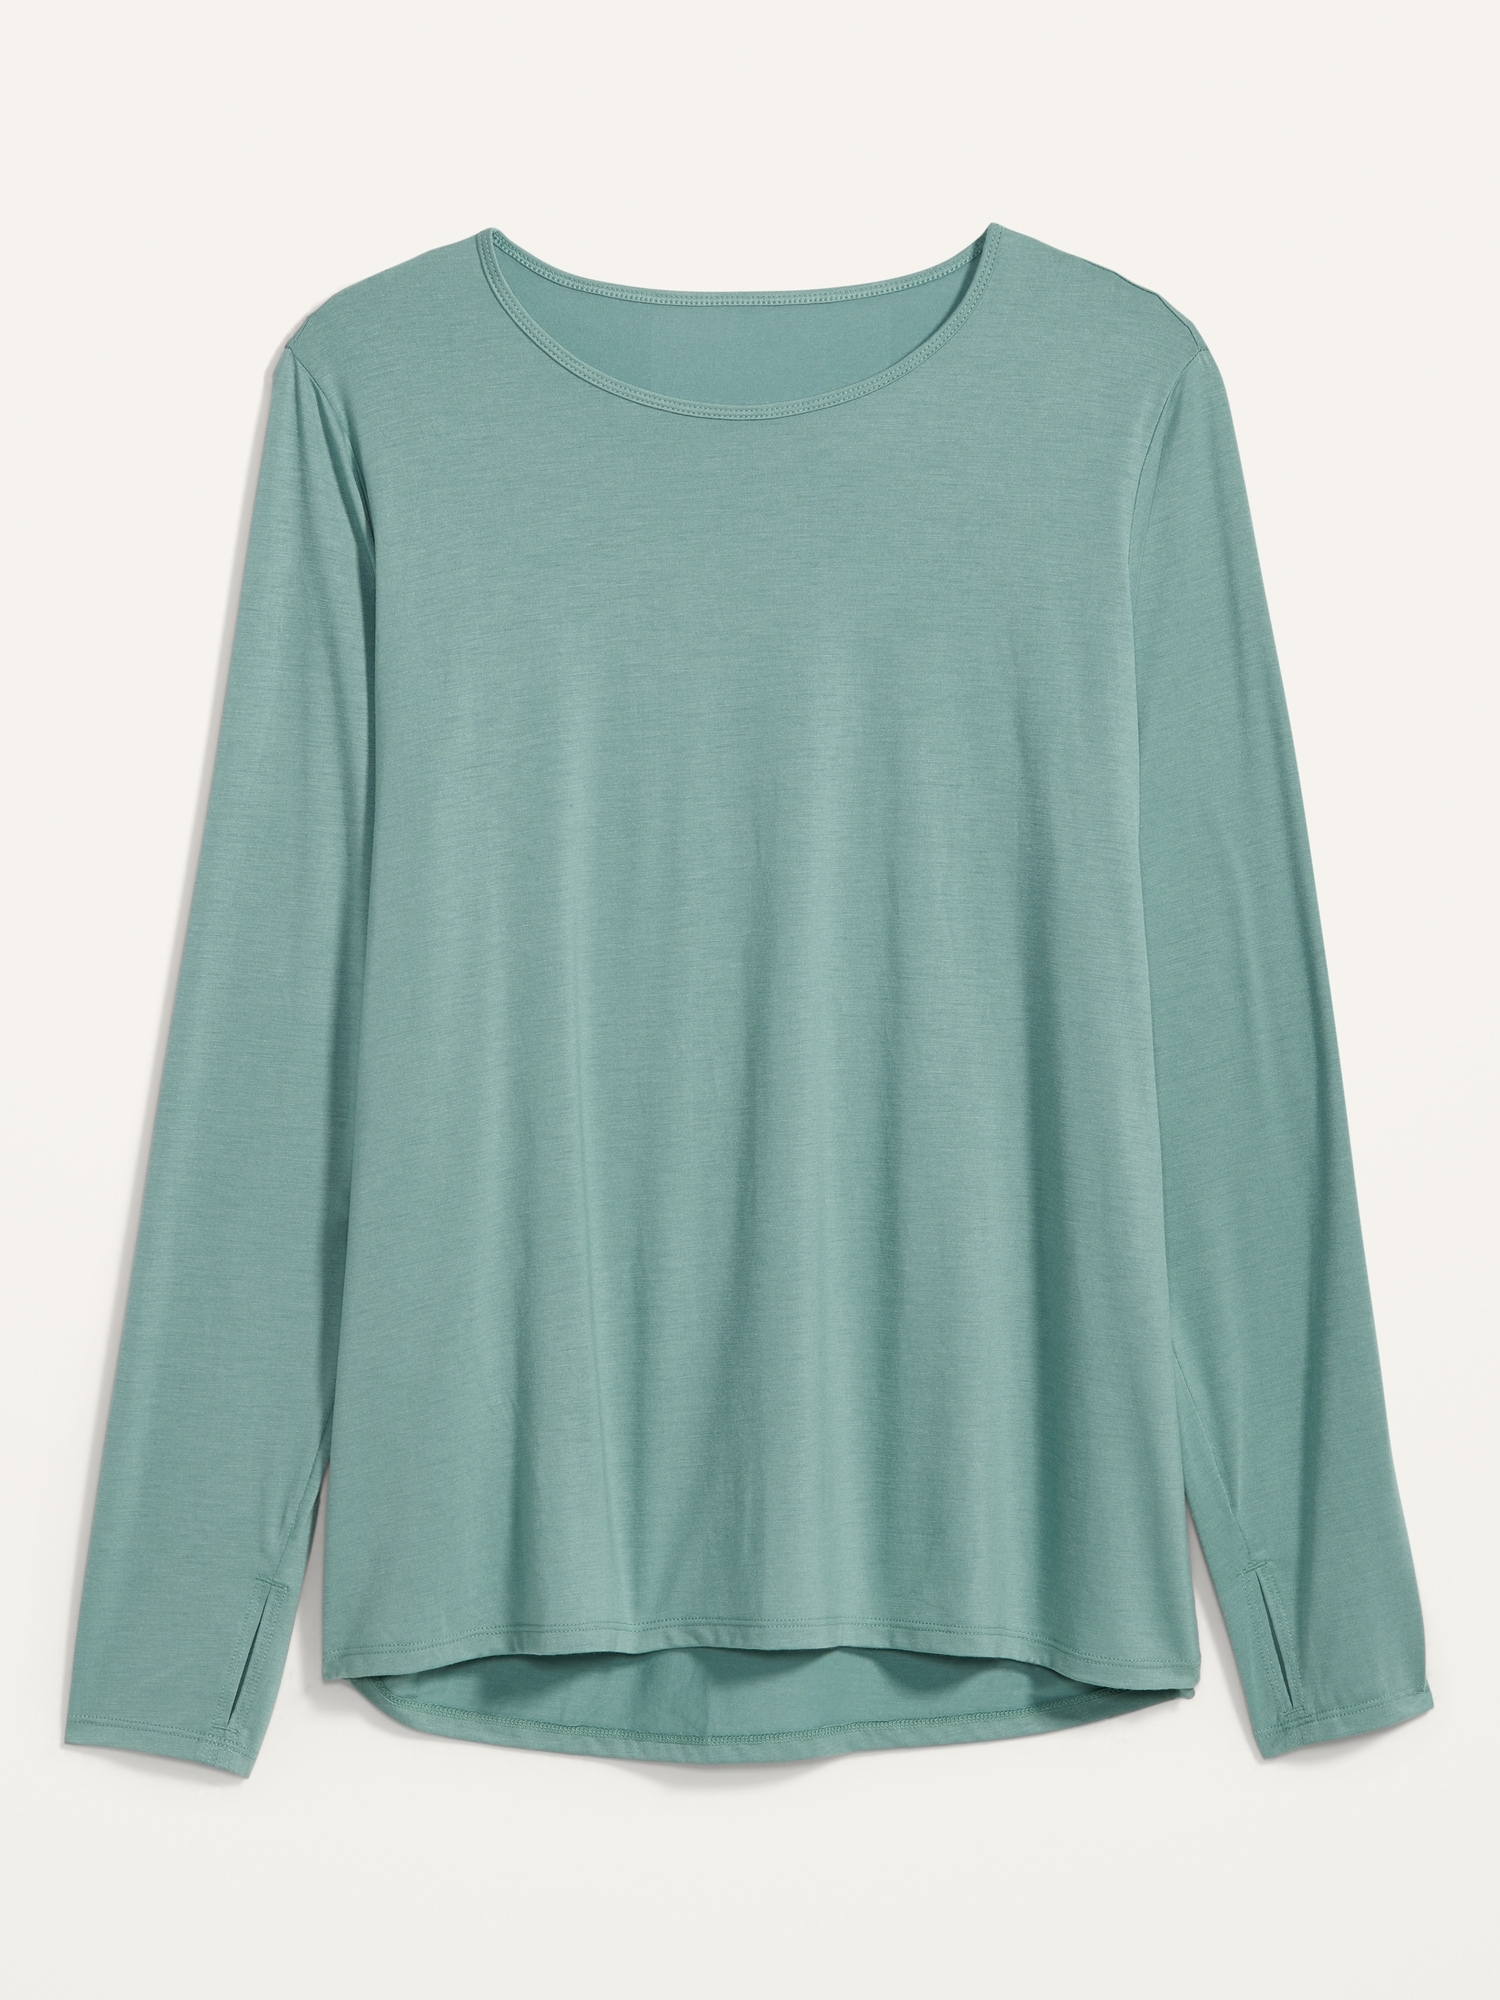 Go-Warm Jersey Plus-Size Long-Sleeve Top | Old Navy